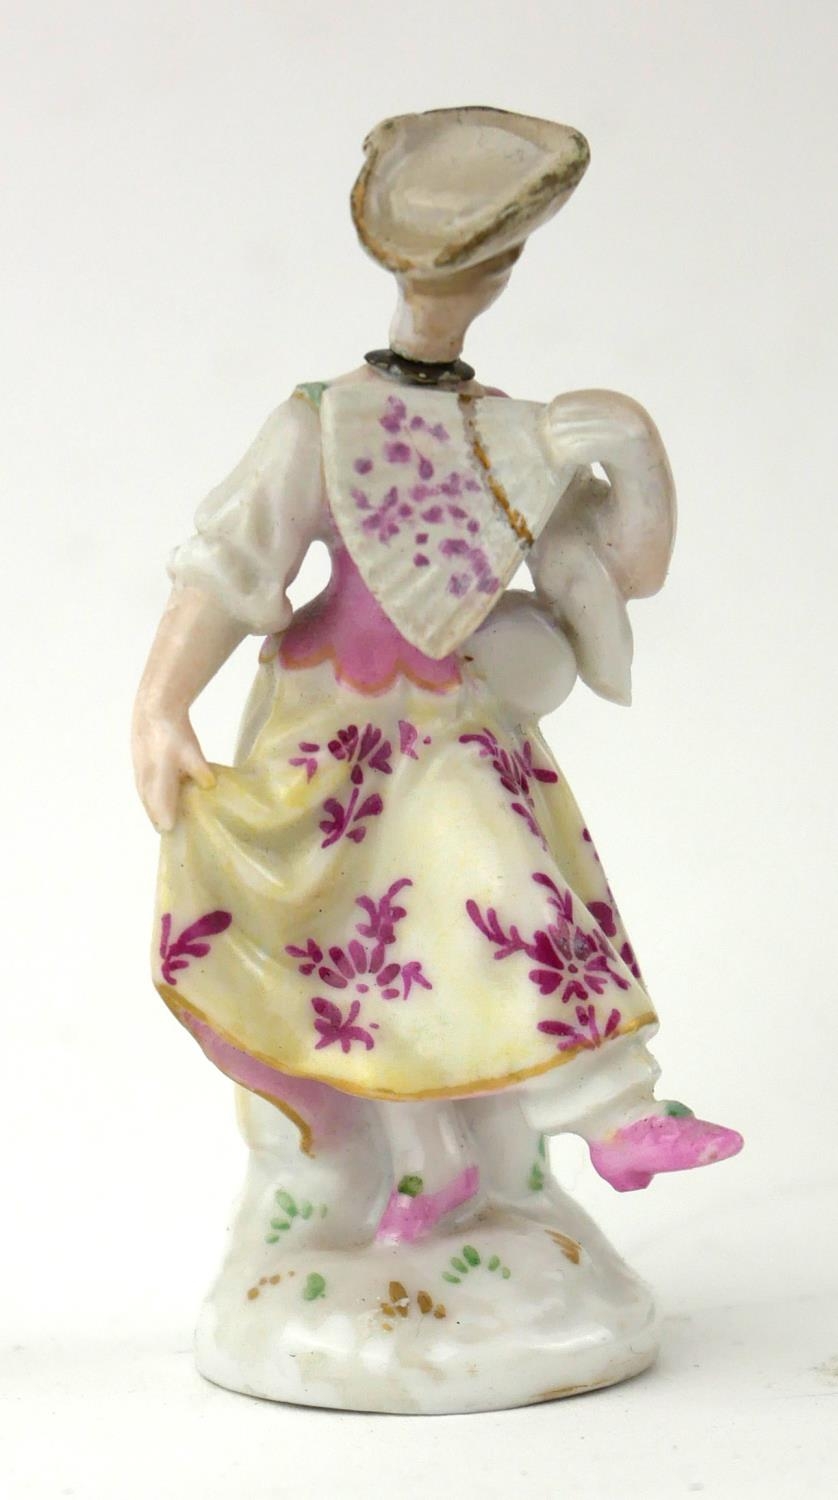 A 19TH CENTURY CONTINENTAL PORCELAIN MINIATURE FIGURAL SCENT BOTTLE Maiden wearing period attire, - Image 2 of 4